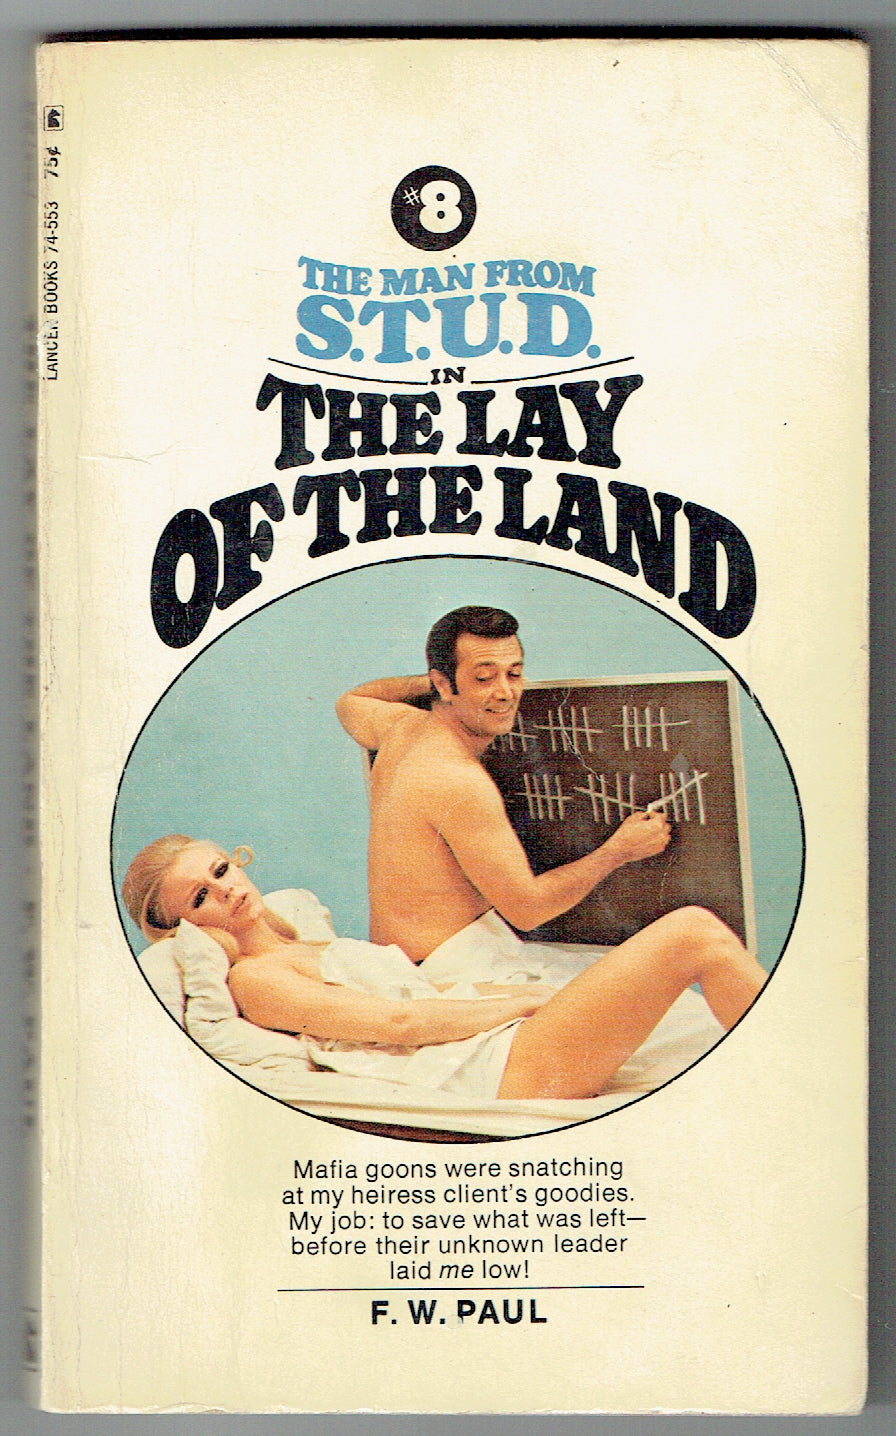 The Man from S.T.U.D. #8: The Lay of the Land (Lancer 74-553)